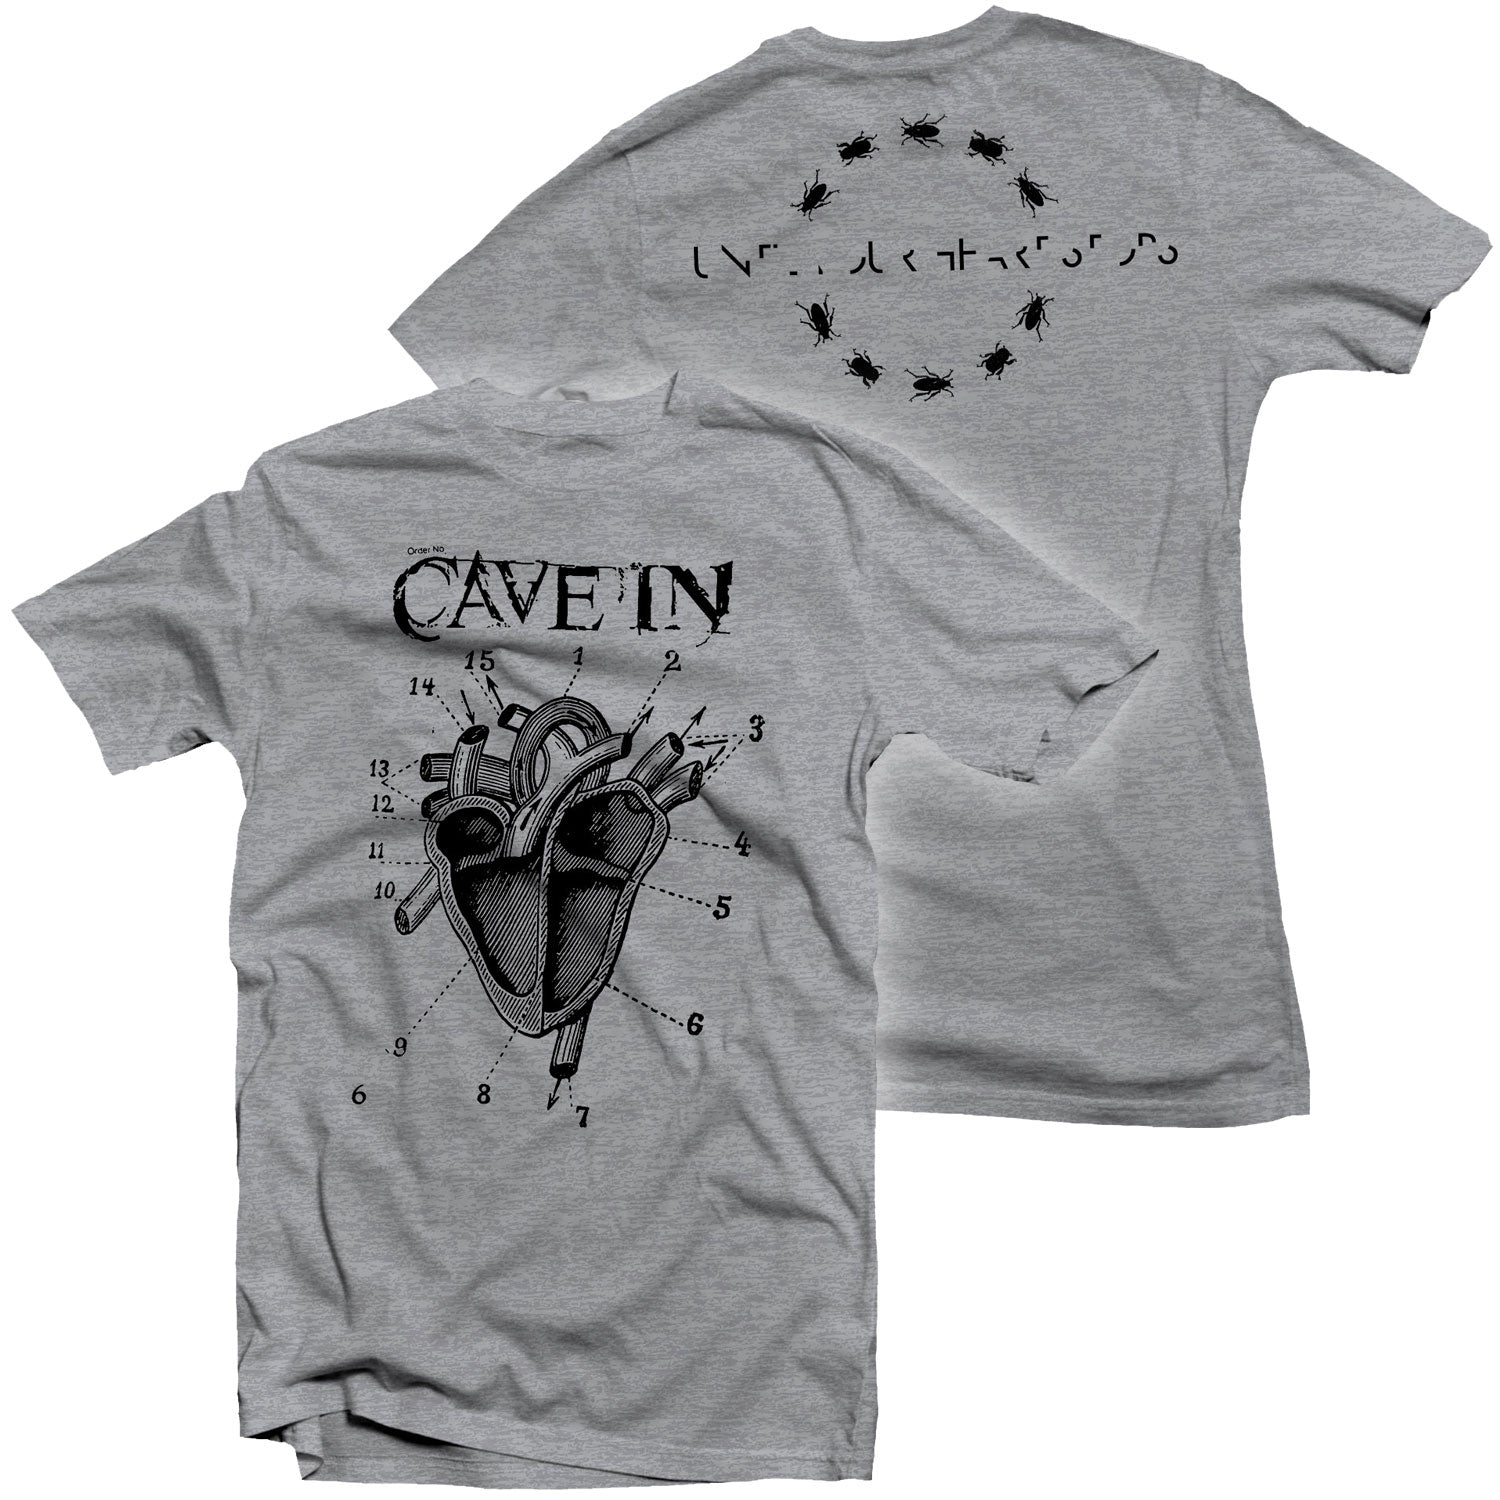 Cave In "Classic Heart" T-Shirt